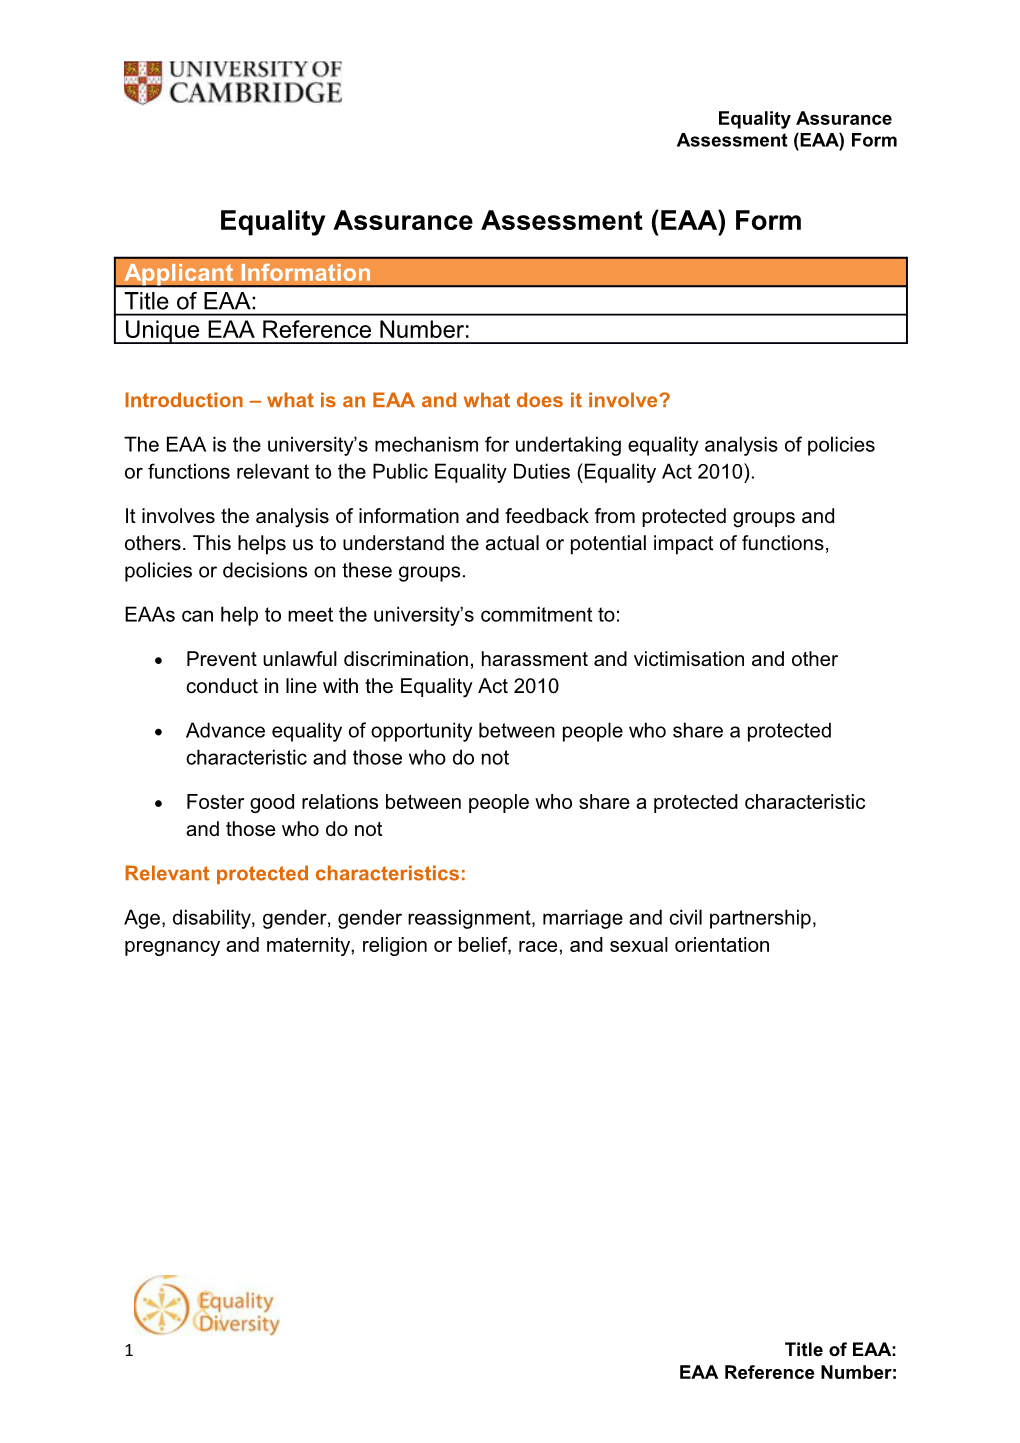 Equality Assurance Assessment (EAA) Form